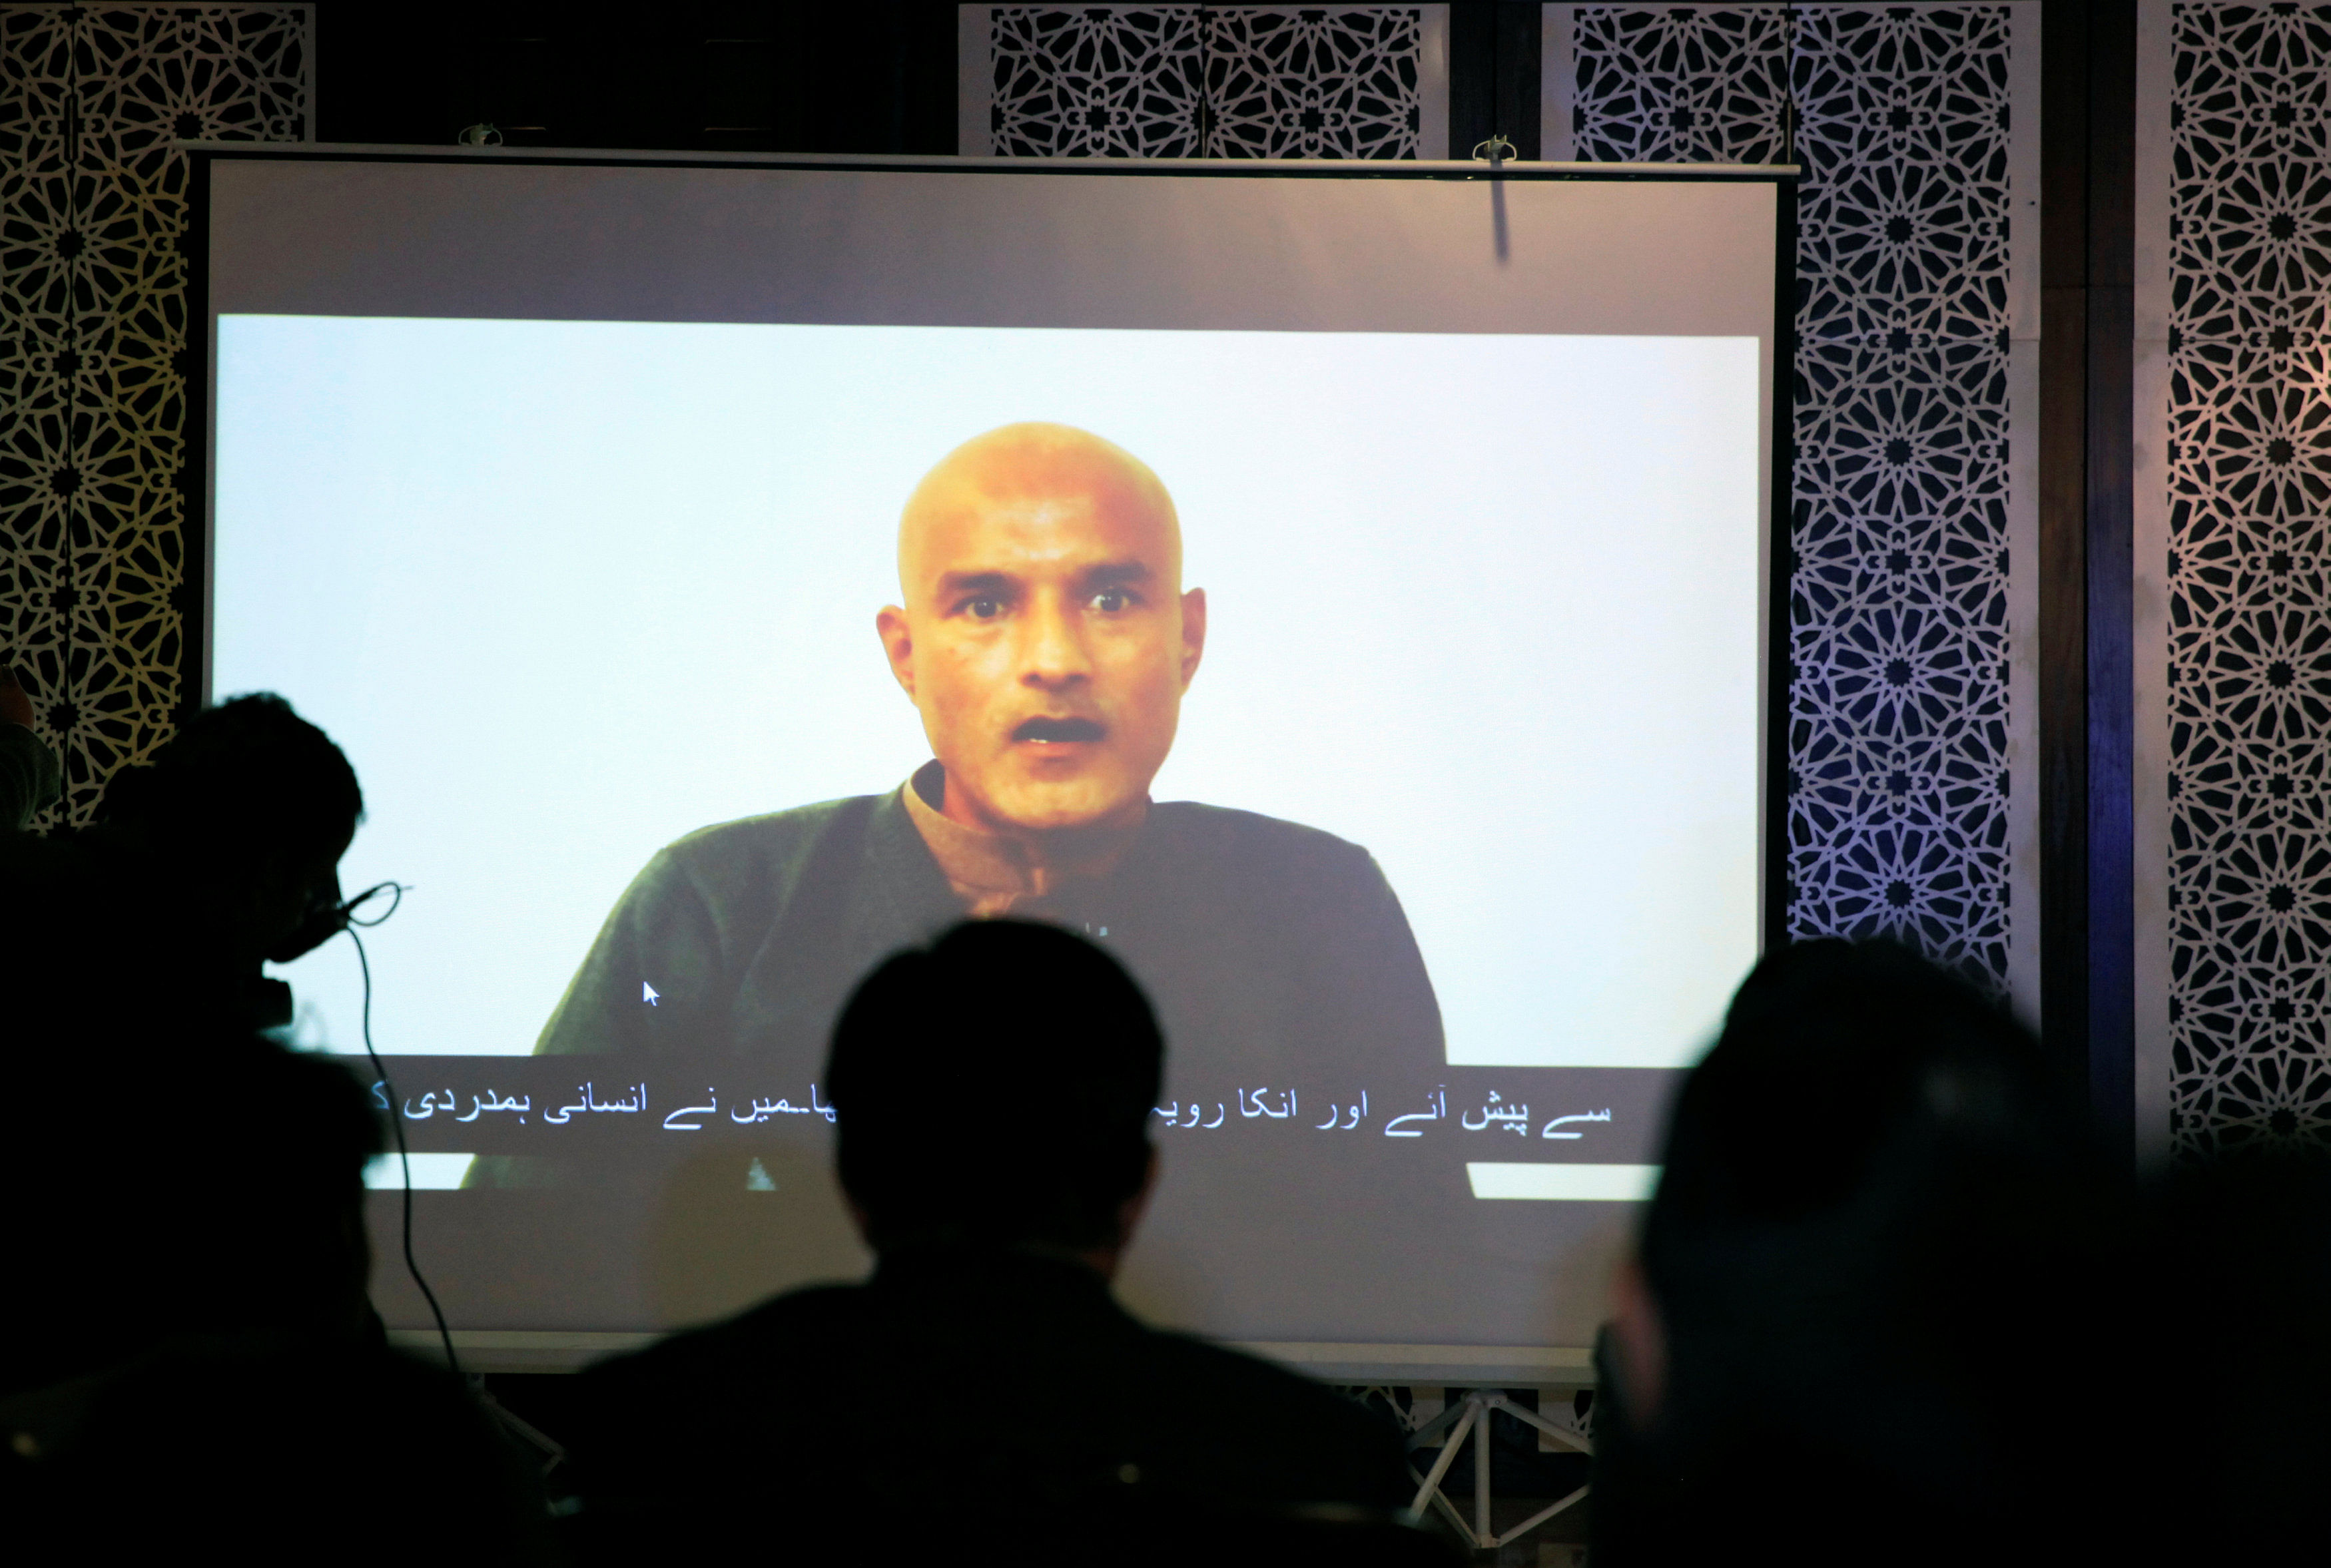 Former Indian navy officer Kulbhushan Sudhir Jadhav is seen on a screen during a news conference at the Ministry of Foreign Affairs in Islamabad. Credits: Reuters Photo